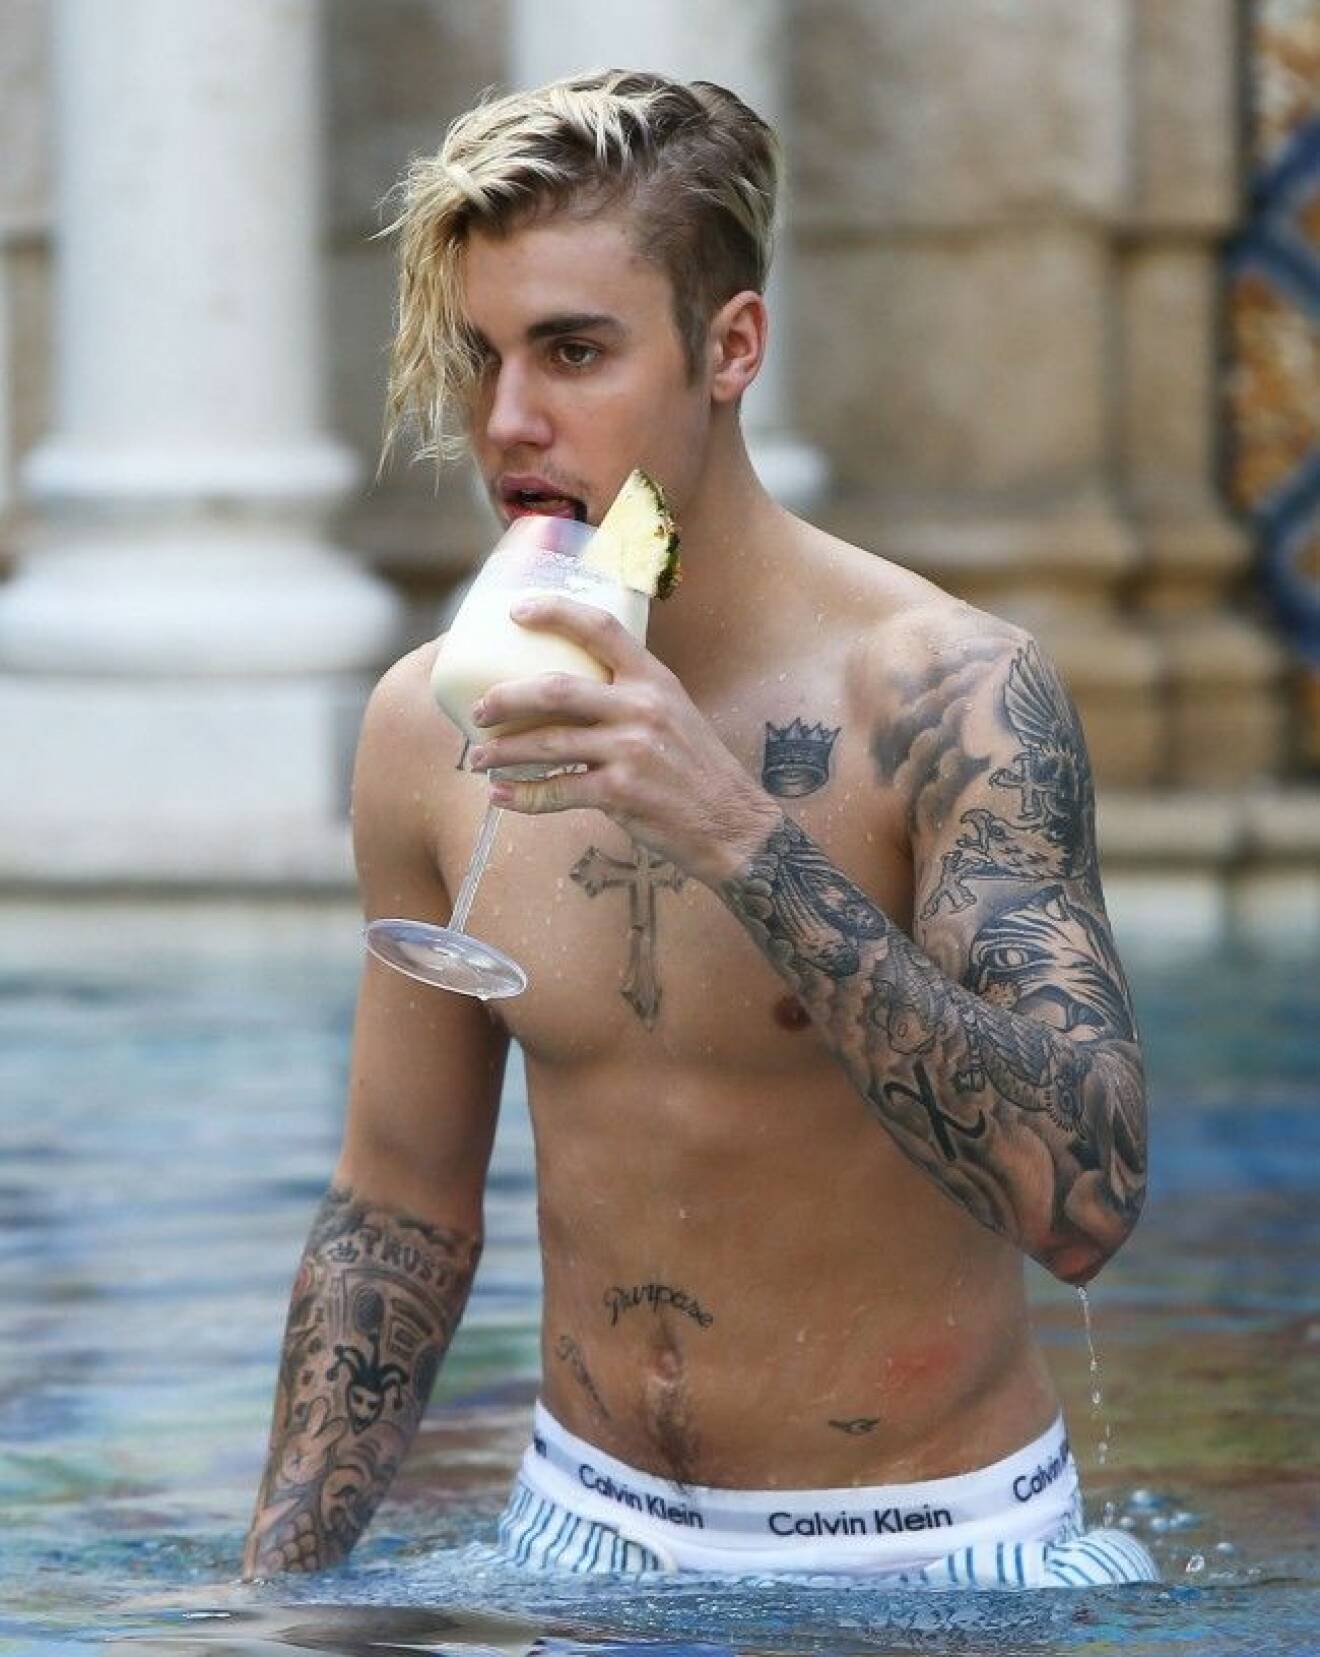 *** OBS - INGÅR EJ I AVTAL / INTERNET OUT *** Exclusive... 51925587 Pop star Justin Bieber shows off his fit physique and tattoos while cooling off at the Versace Mansion in Miami, Florida on December 9, 2015. Justin, who recently returned from London, was seen enjoying a frozen cocktail with friends at the famous luxury hotel. NO INTERNET USE WITHOUT PRIOR AGREEMENT FameFlynet, Inc - Beverly Hills, CA, USA - 1 (818) 307-4813 COPYRIGHT STELLA PICTURES